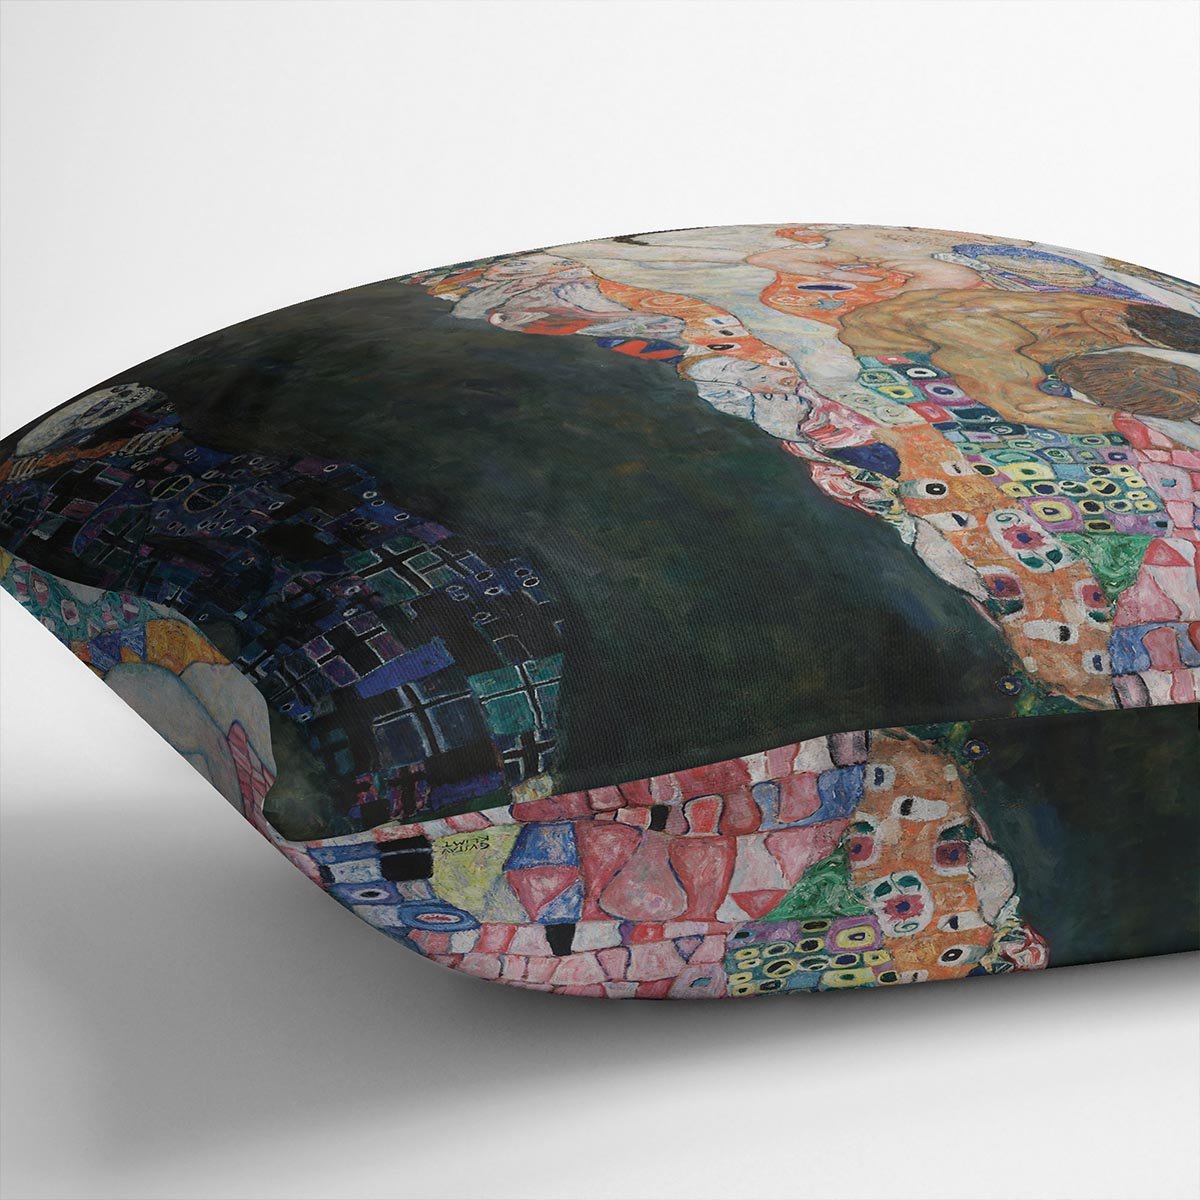 Death and Life by Klimt 2 Throw Pillow